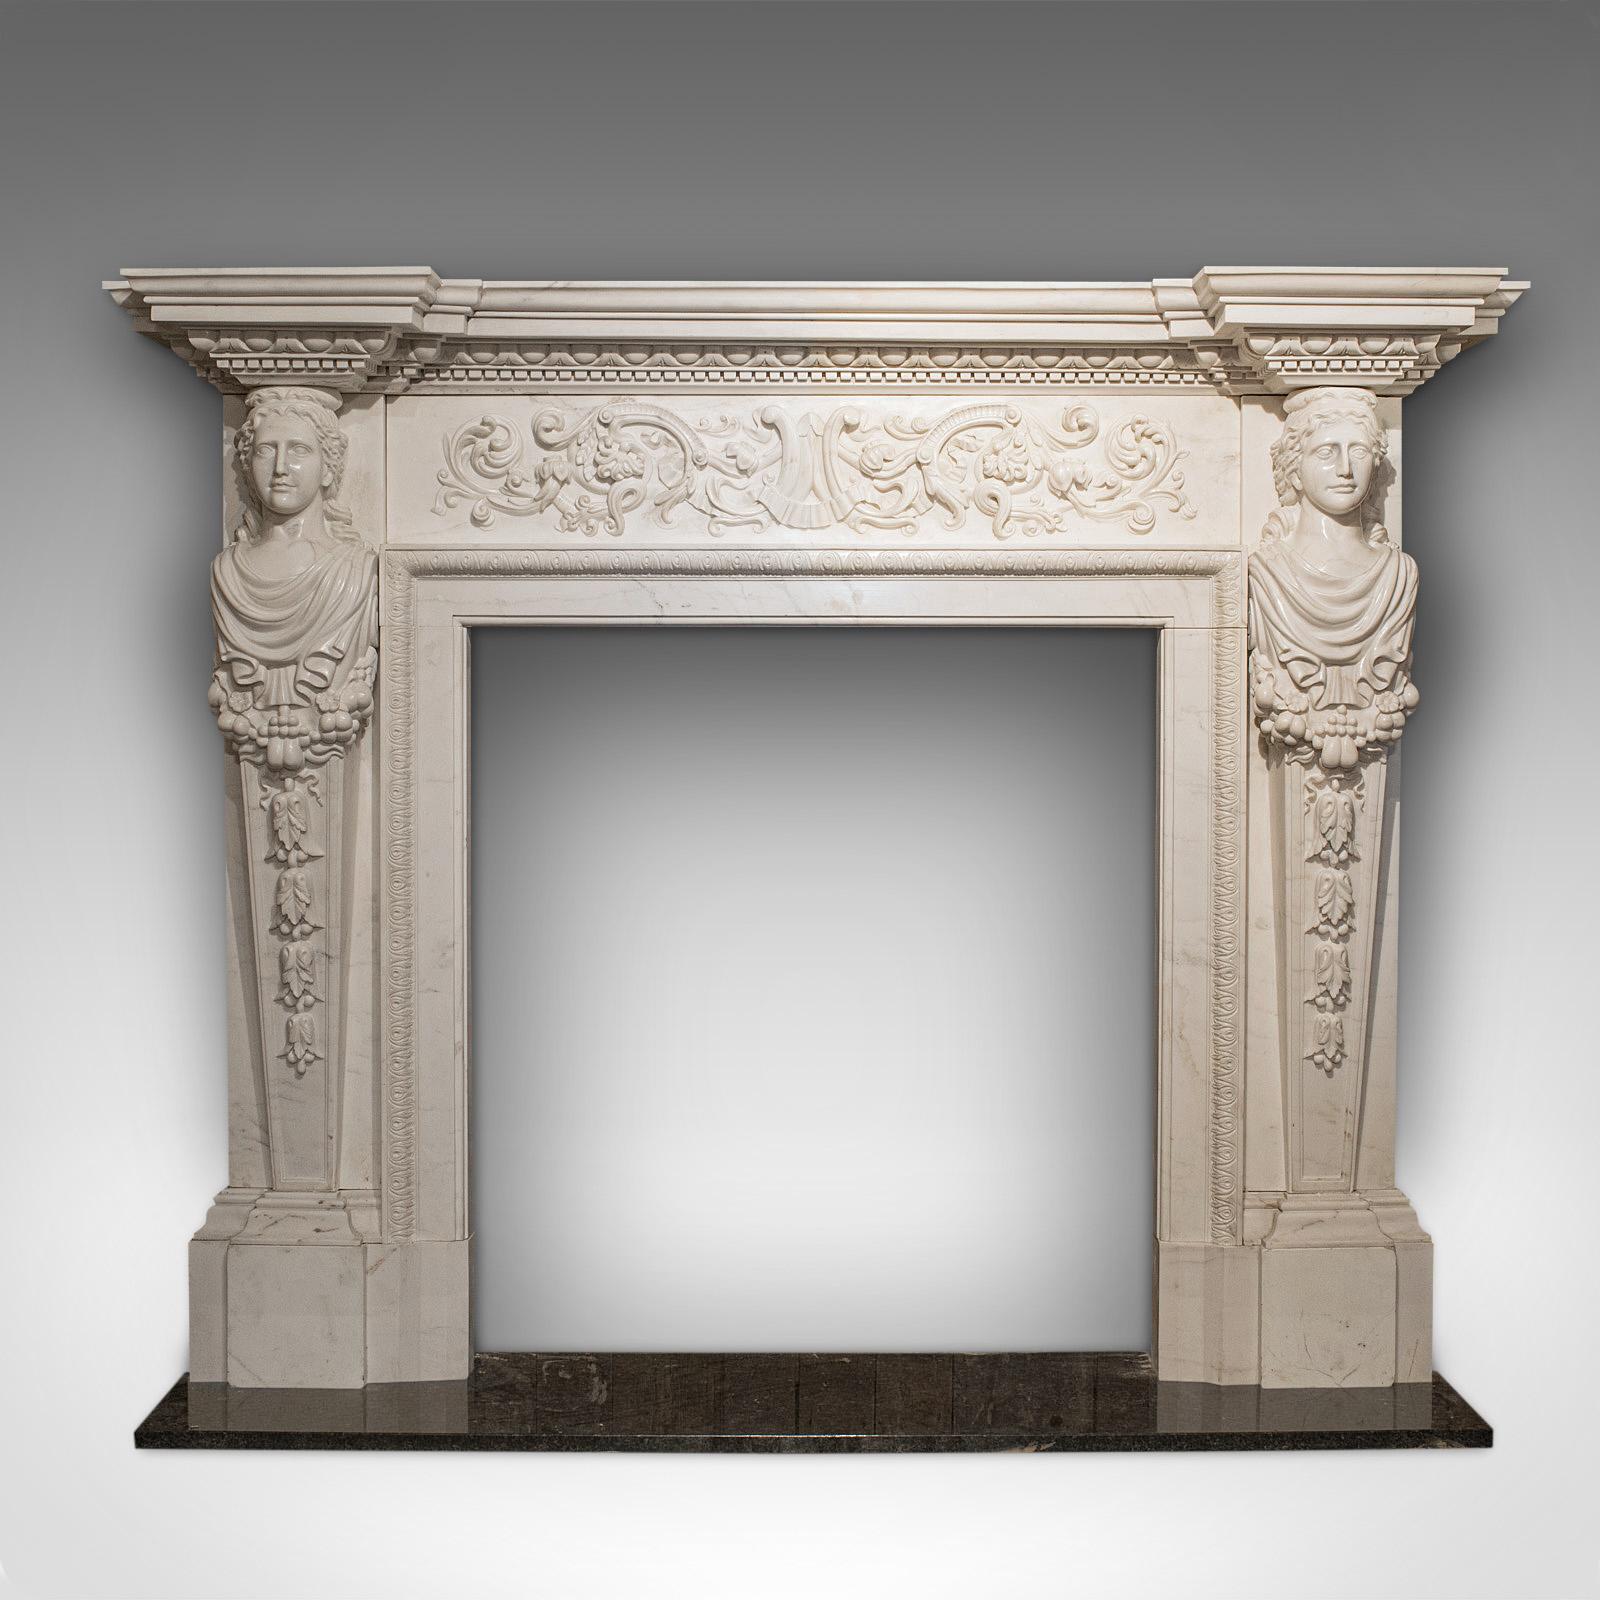 This is a large monumental fireplace. An English, Blanco marble fire surround with neoclassical taste by the renowned Devonshire sculptural artist, Dominic Hurley.

Truly impressive proportions of 7.15' x 5.74' (218cm x 175cm)
In the finest